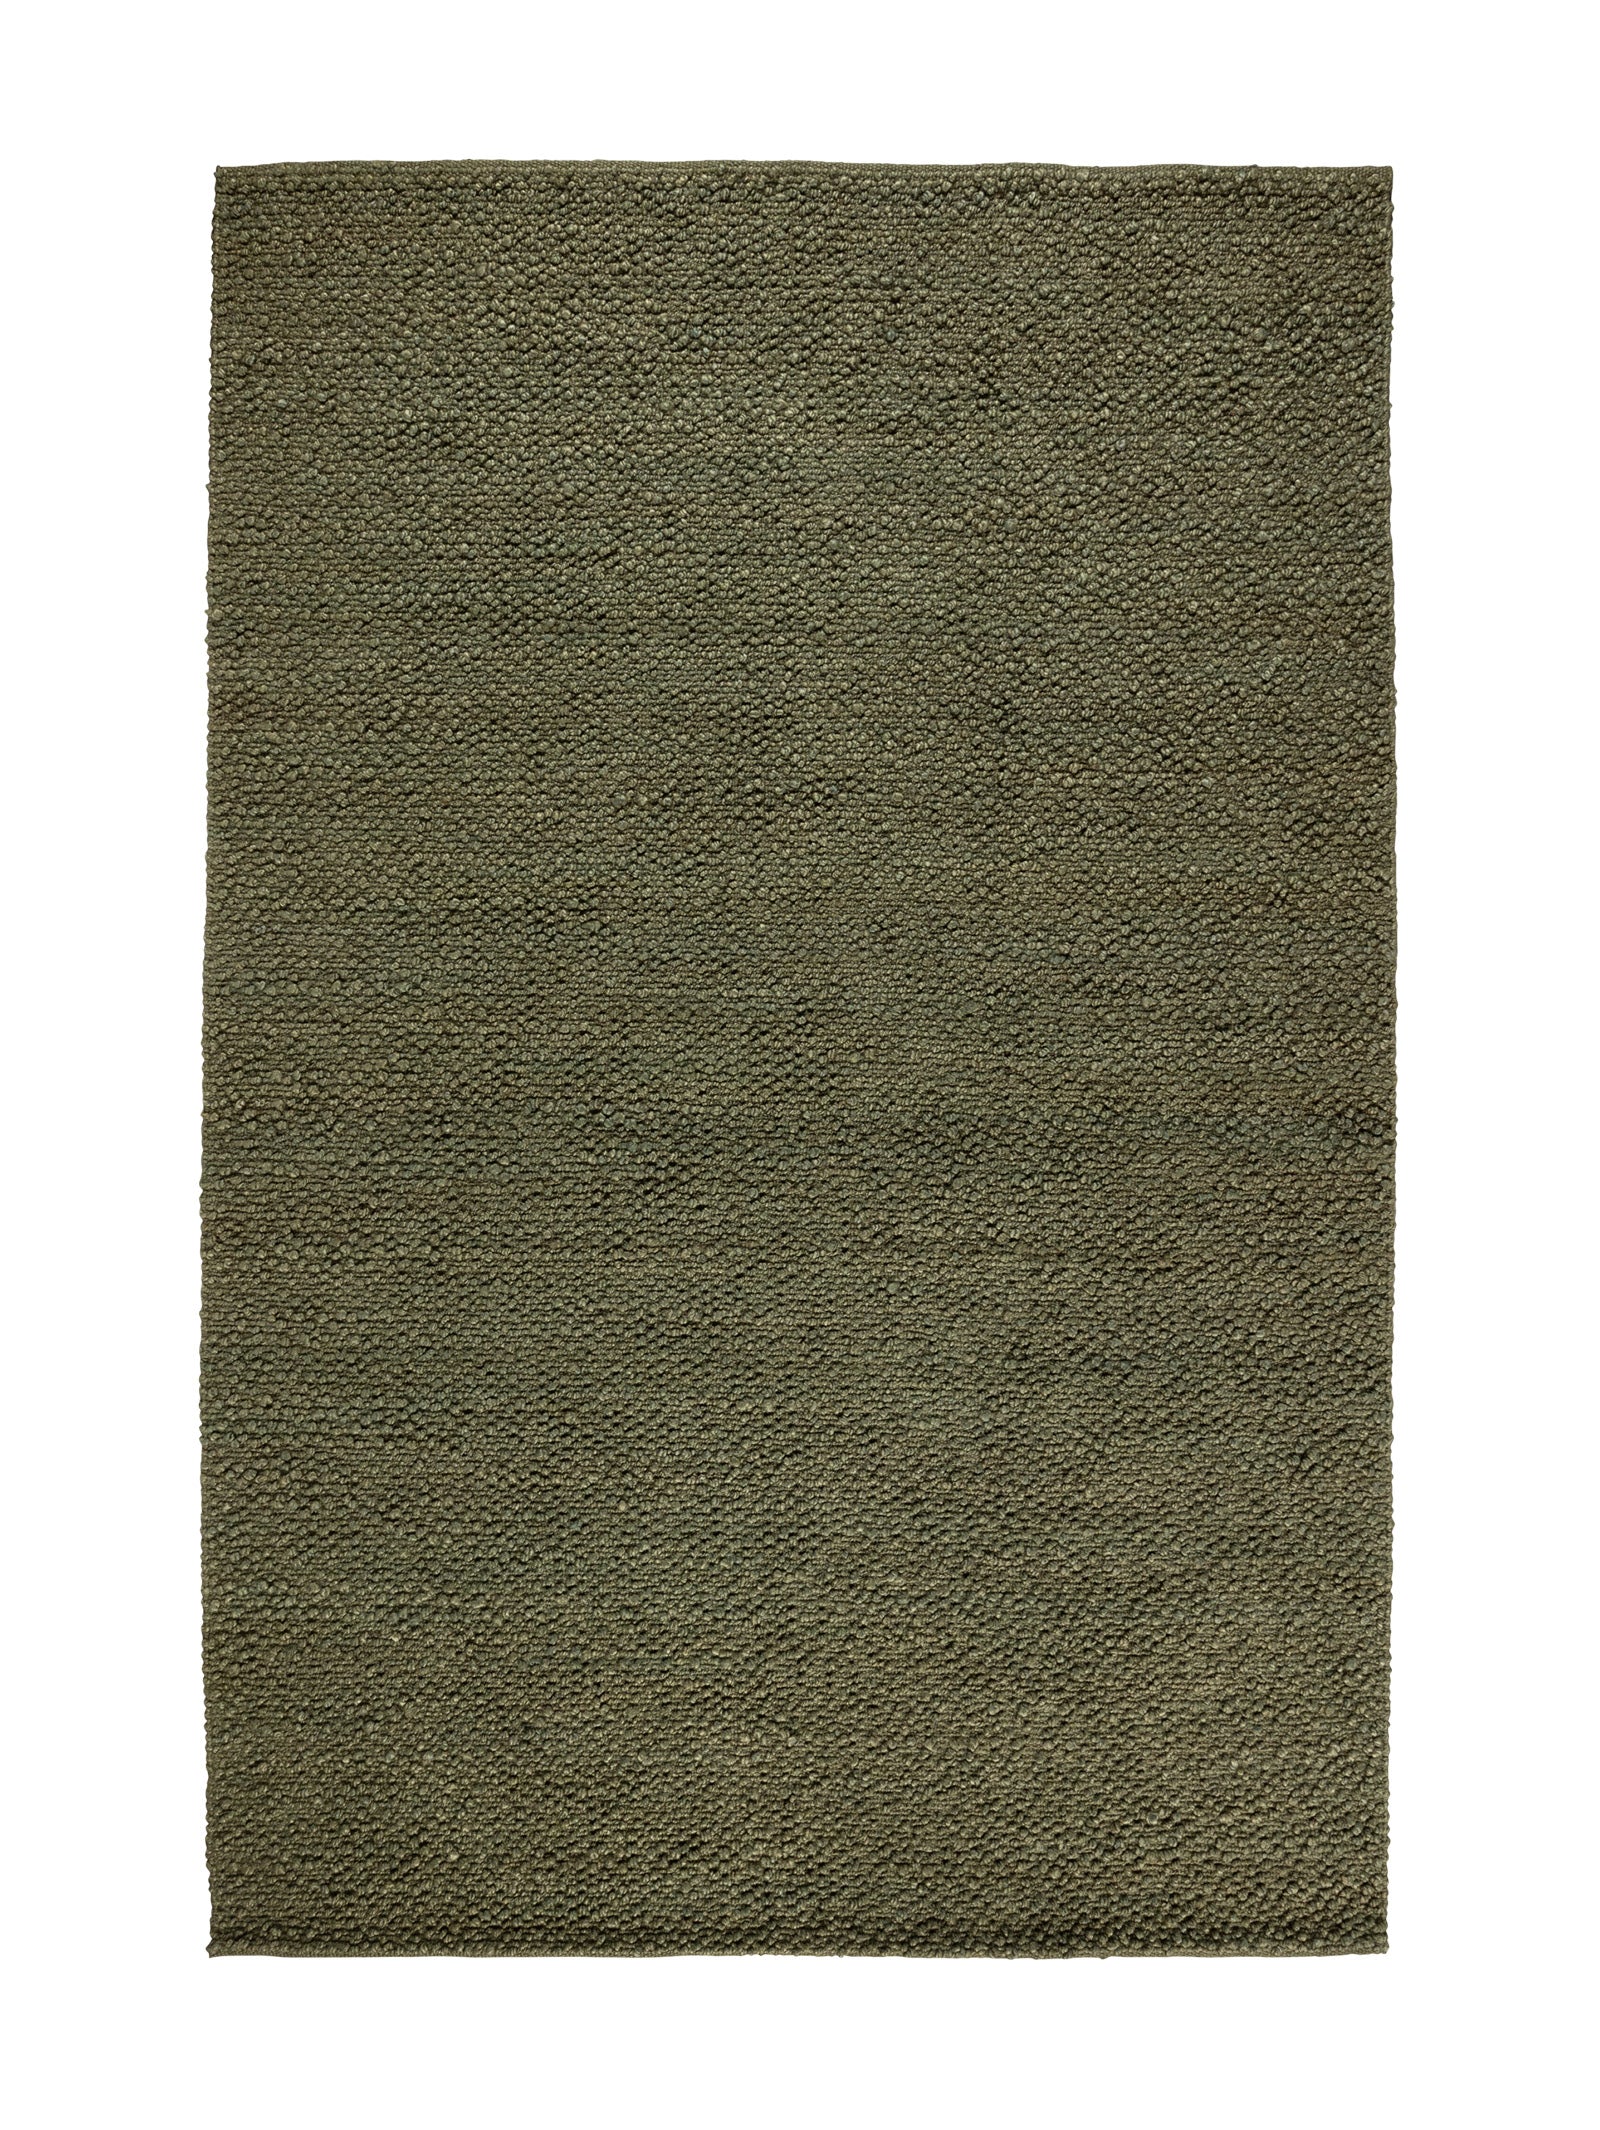 French Boucle Rug in Evergreen